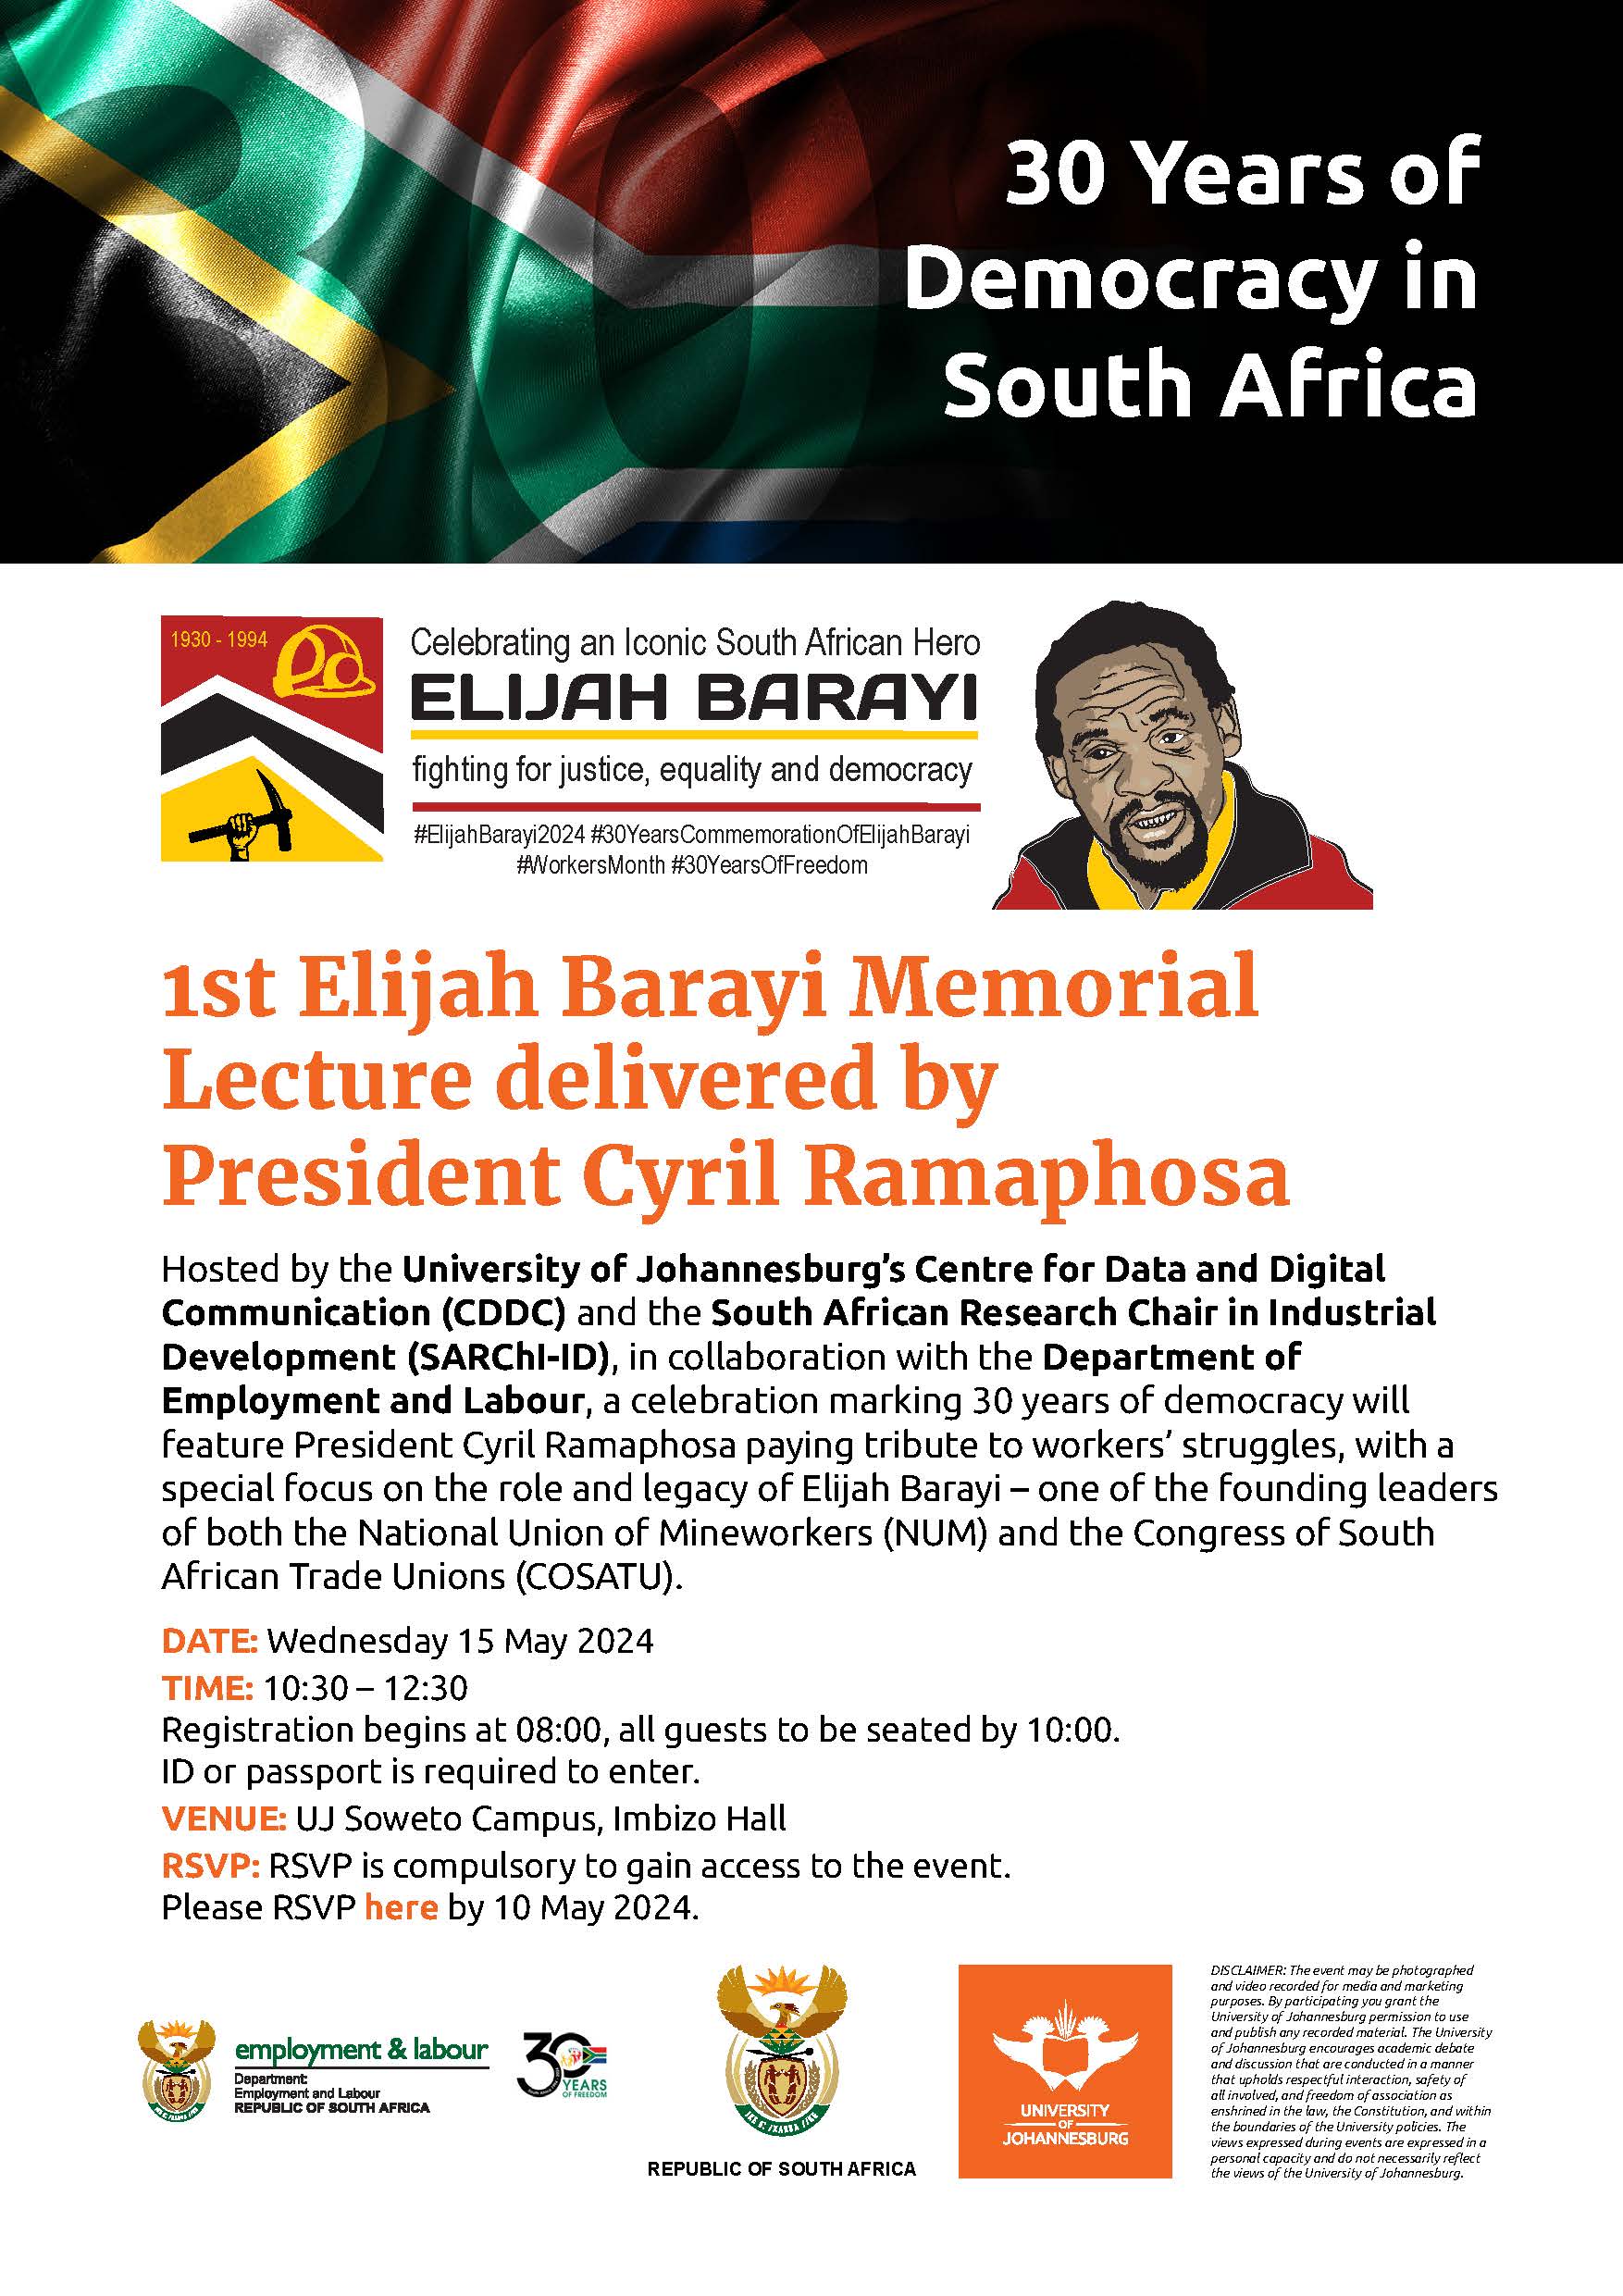 1st Elijah Barayi Memorial Lecture delivered by President Cyril Ramaphosa